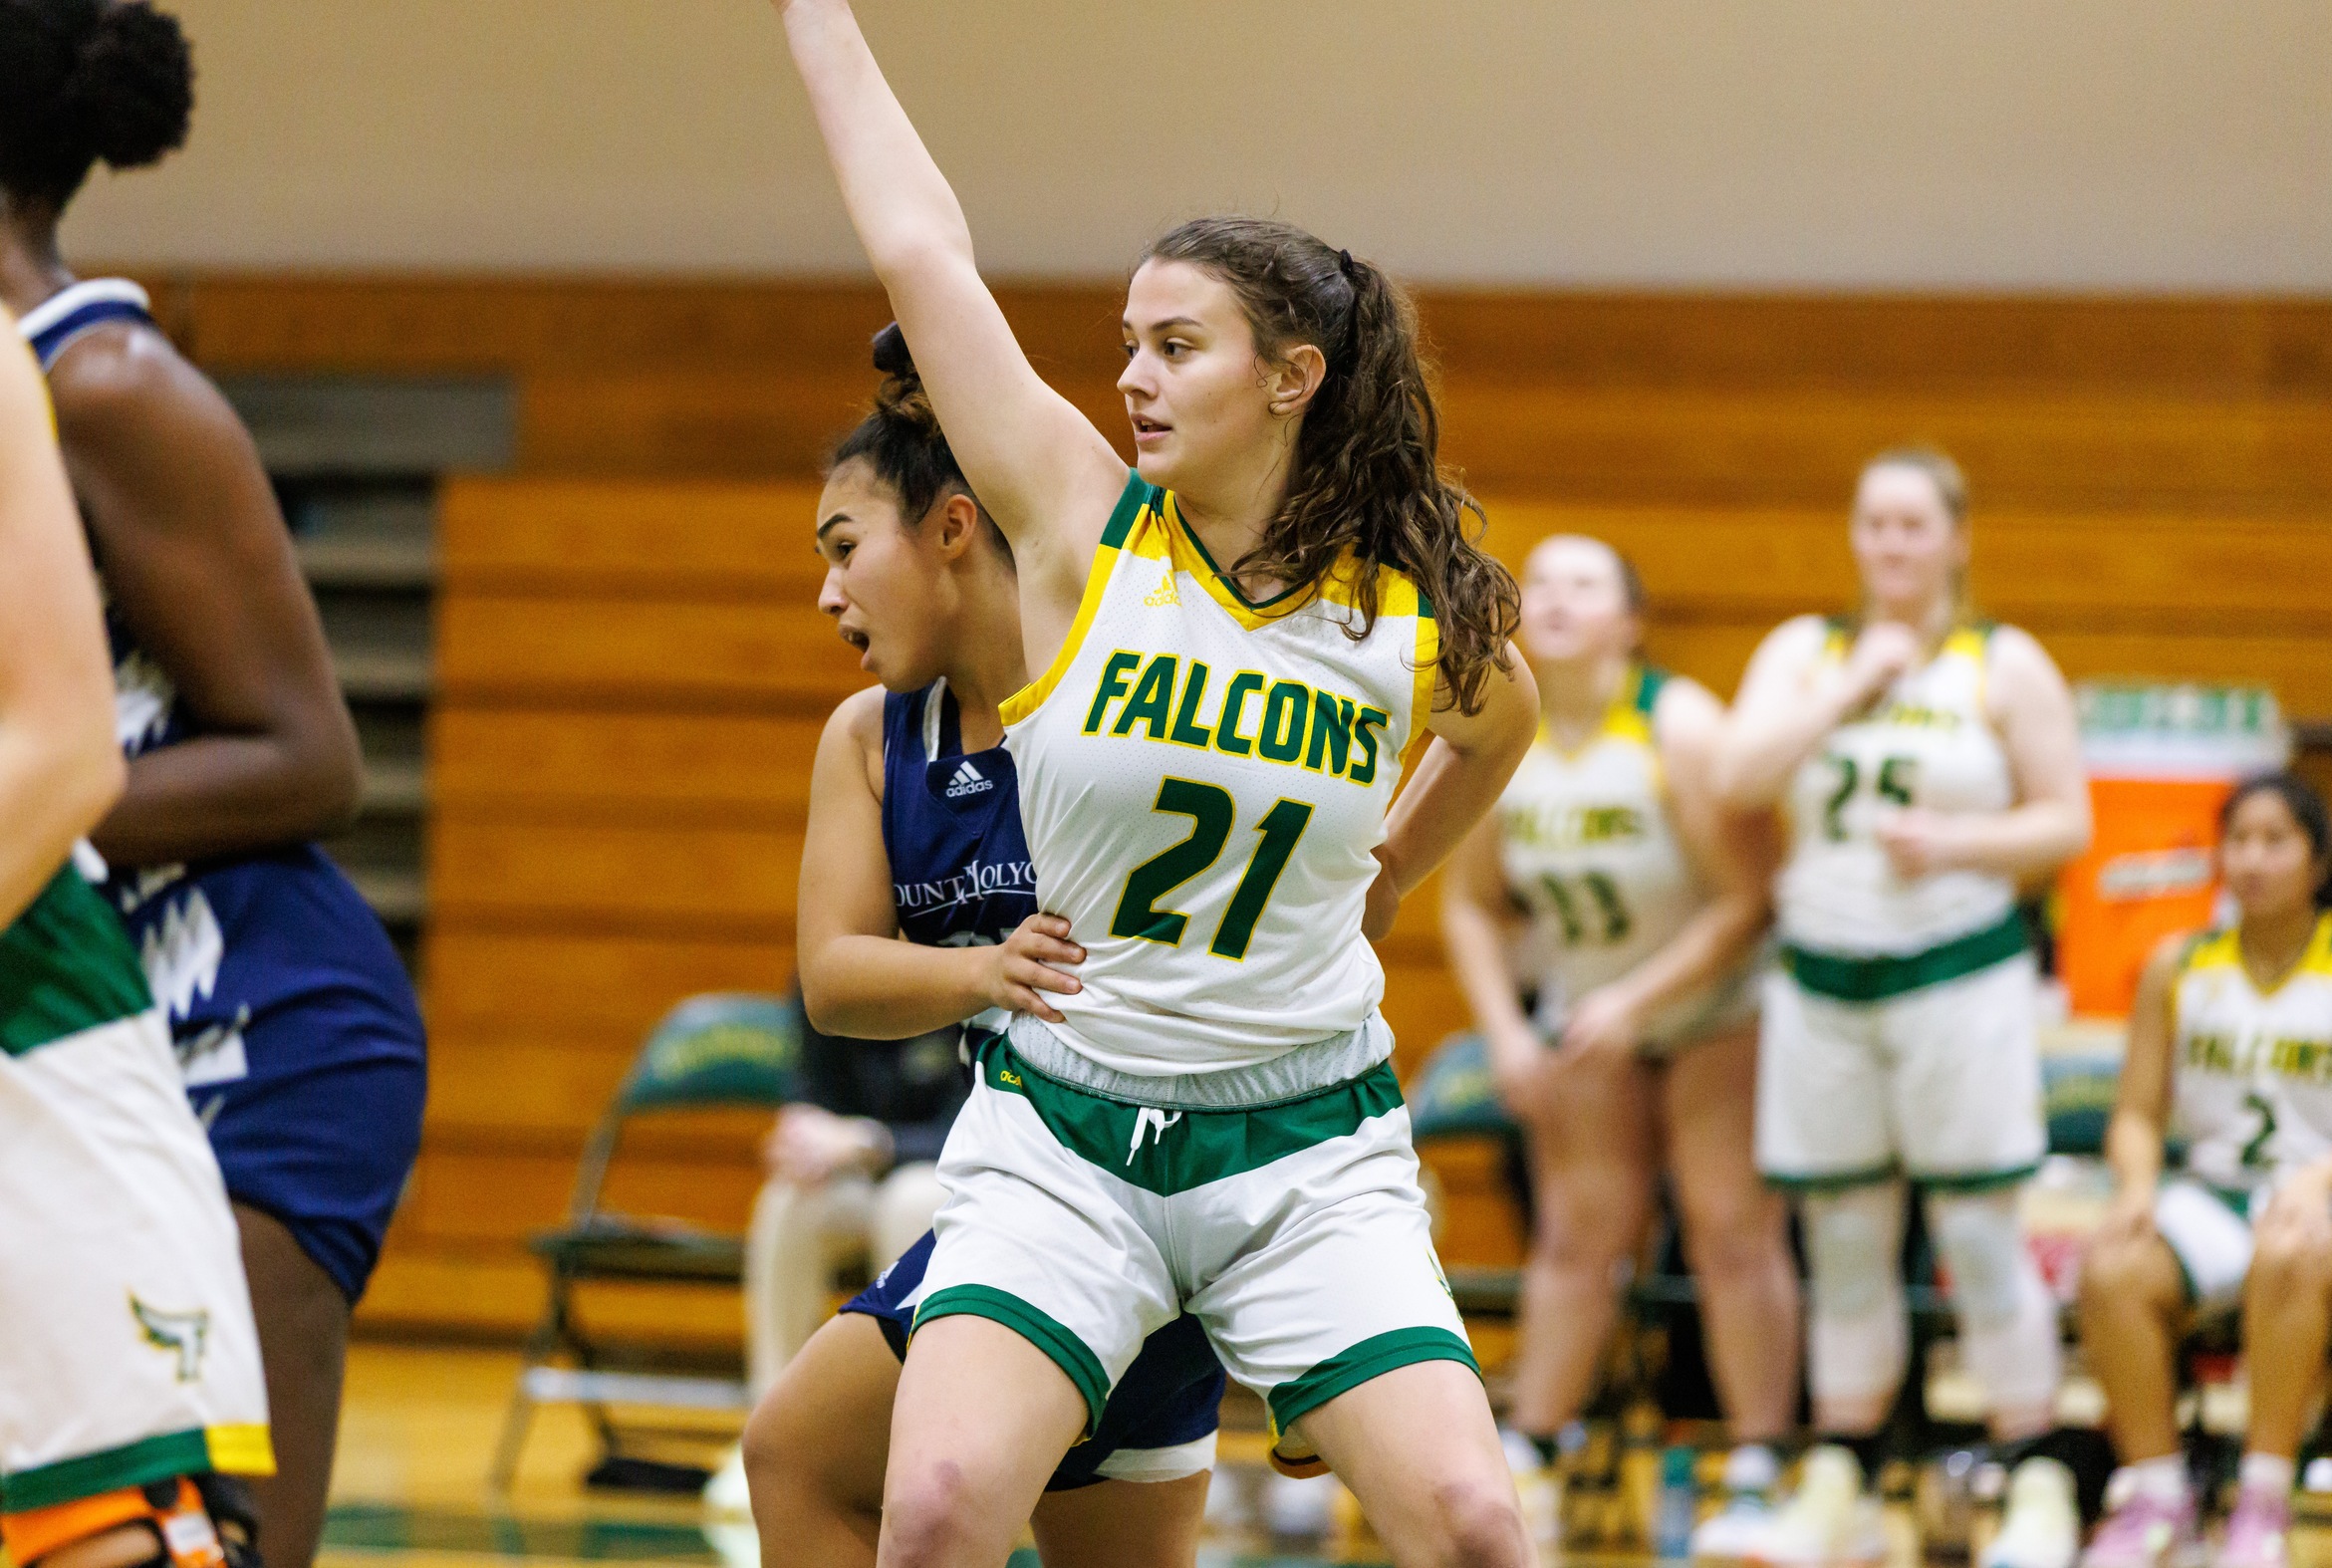 Bears Outlast Falcons in MASCAC Match-up